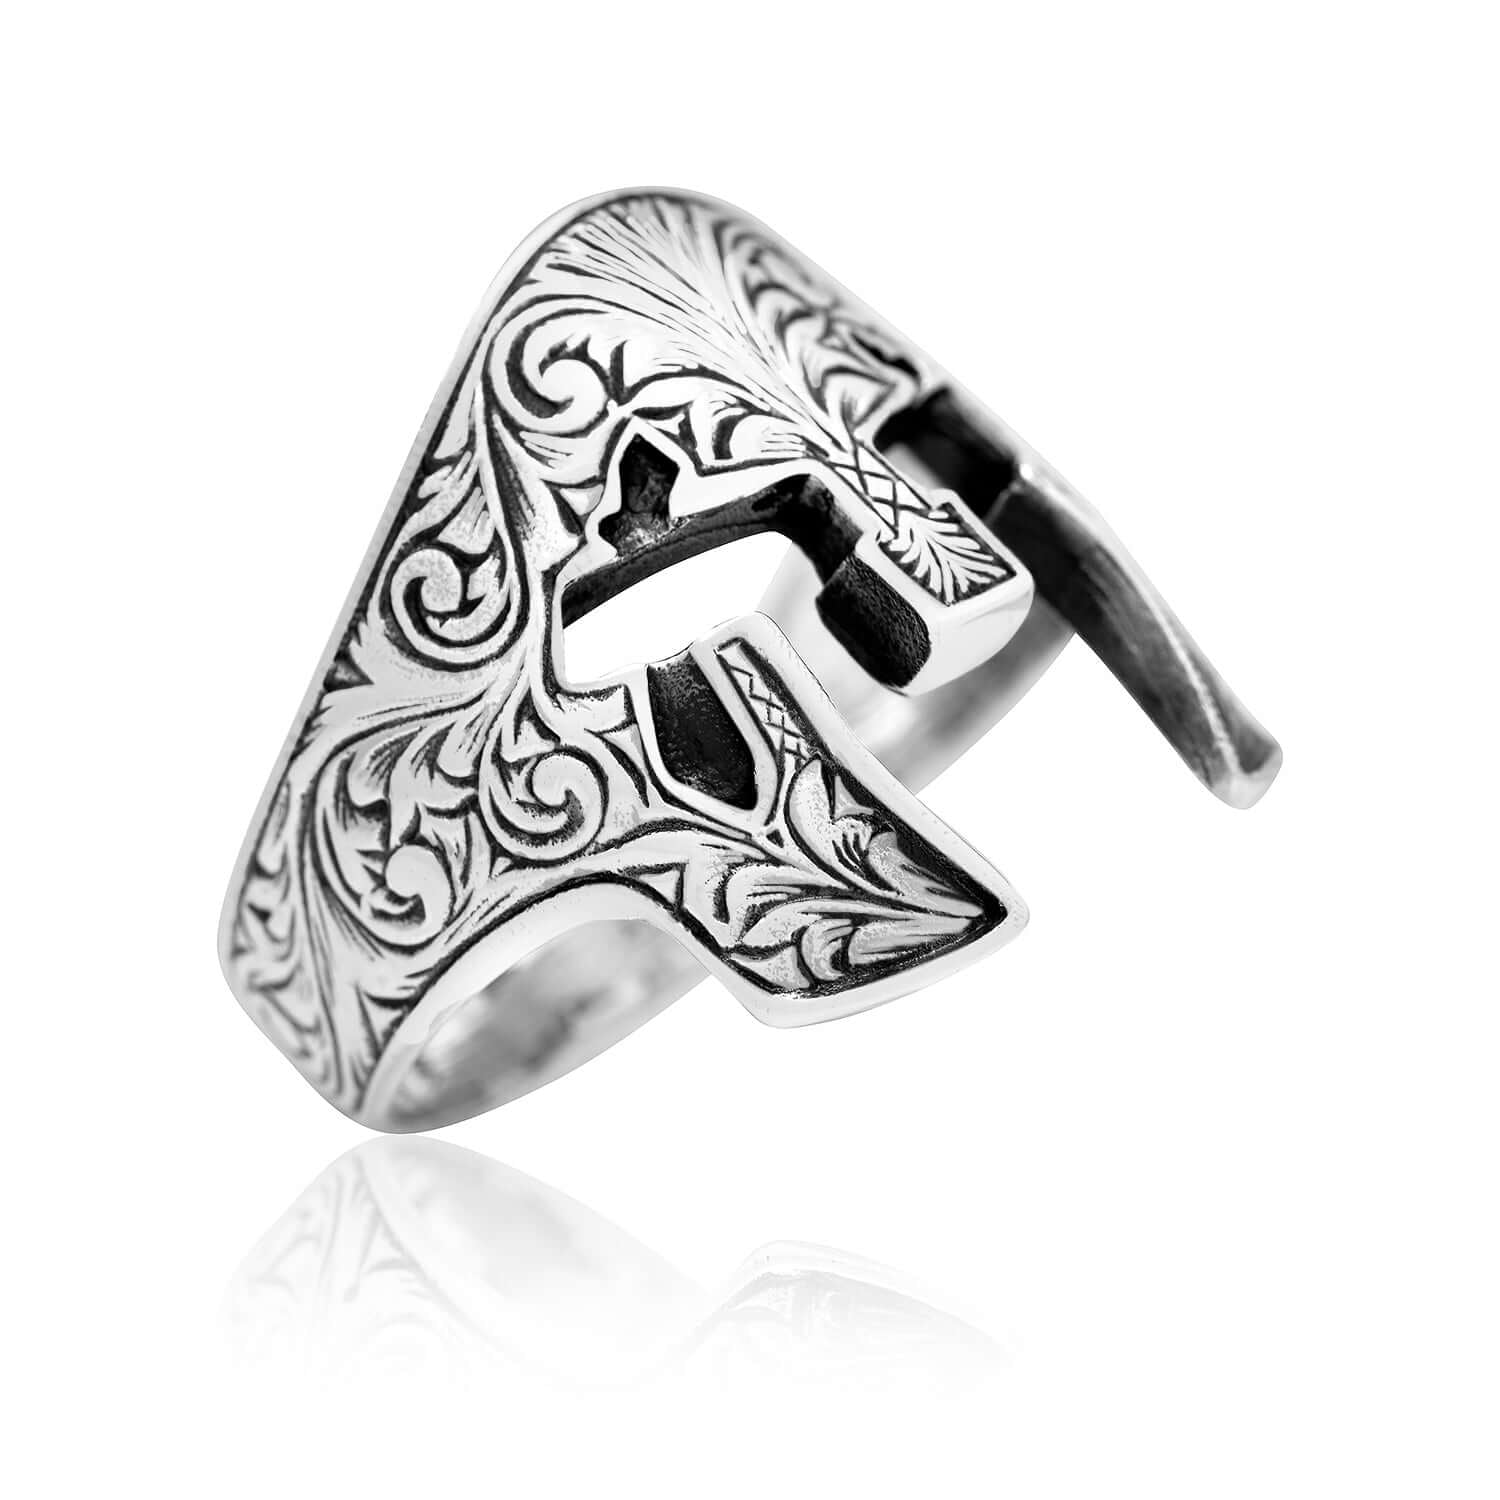 Gladiator-Skull Ring from pure 925 Sterling silver | evilrings